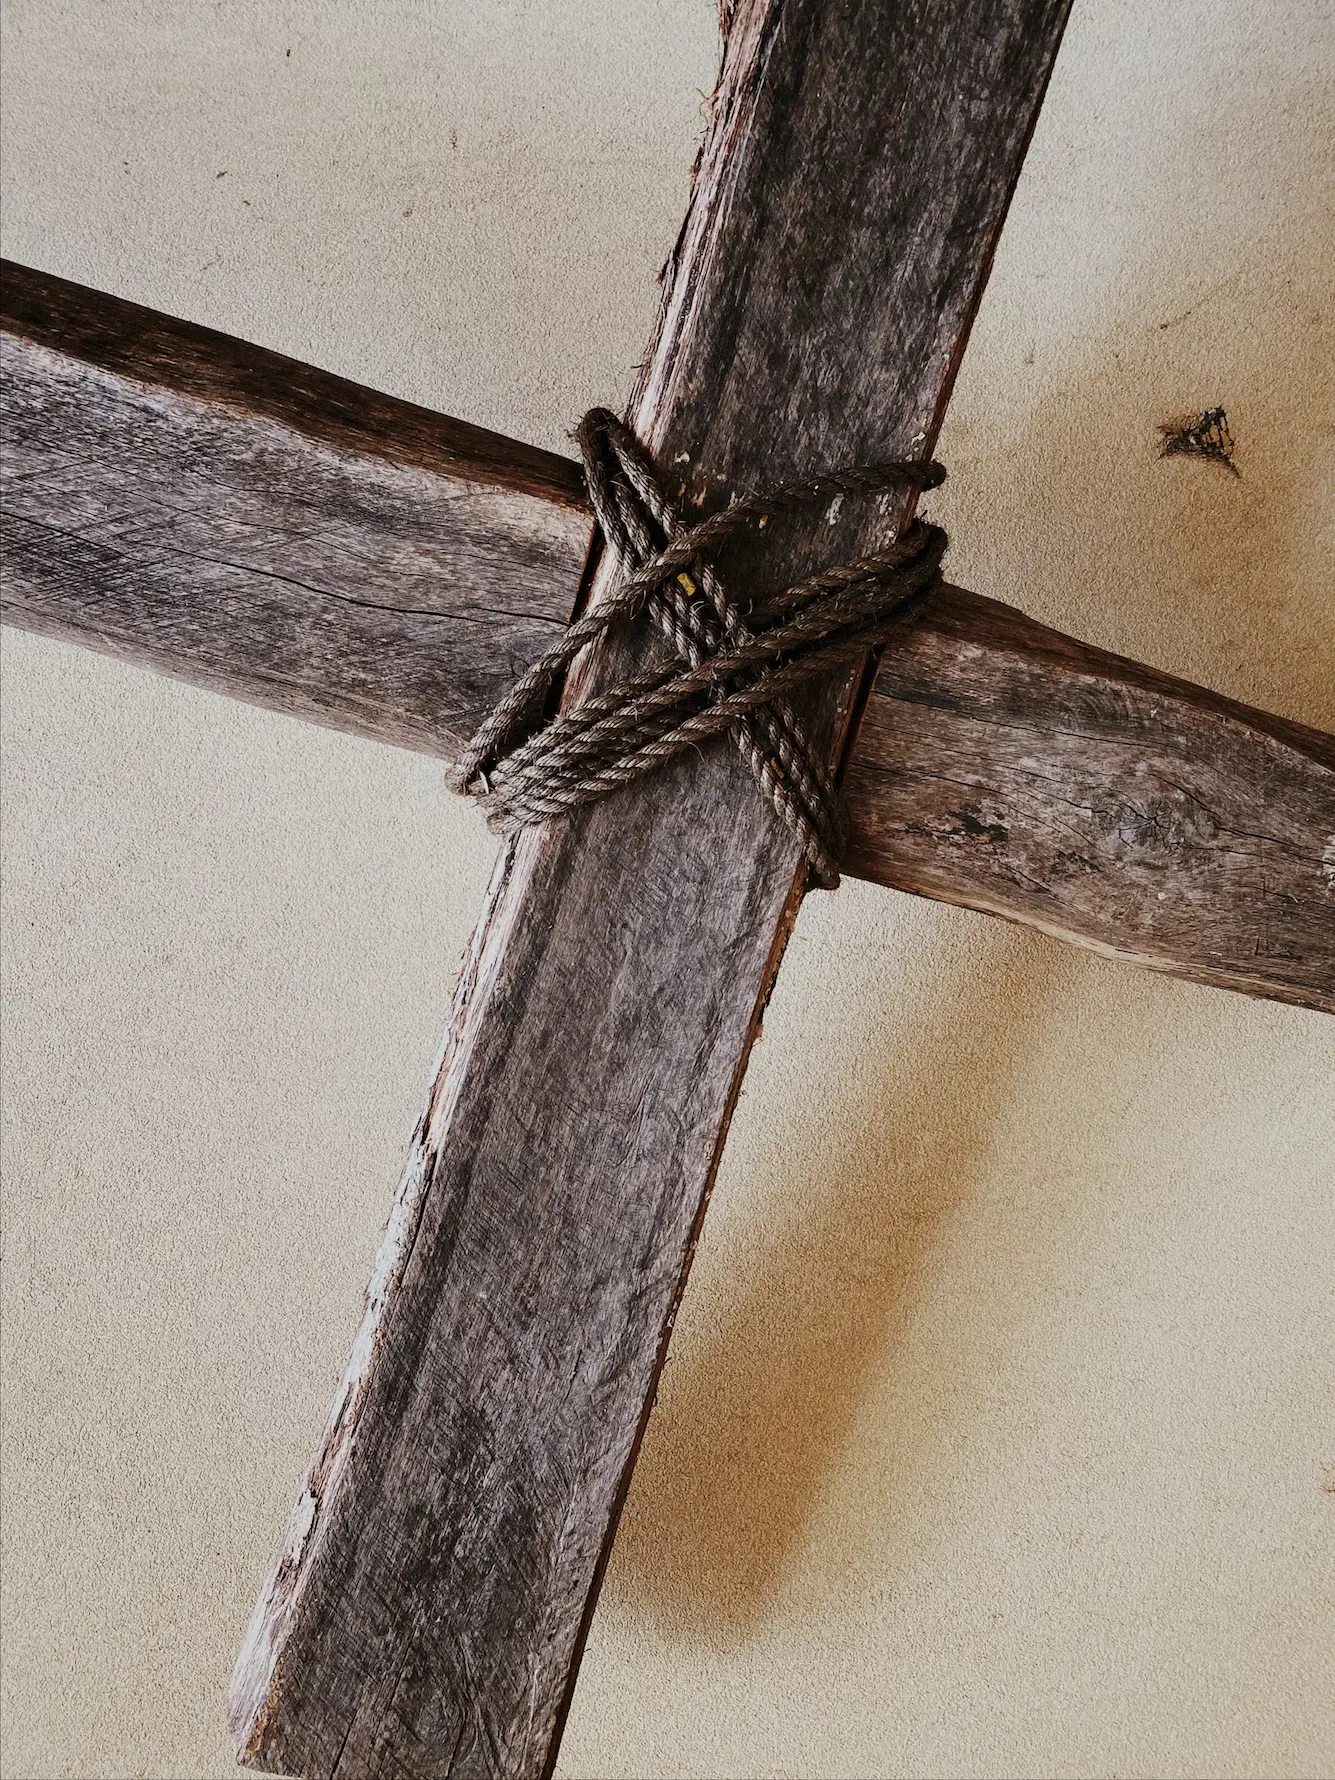 Image of a cross with brown rope tying it together. Rustic.